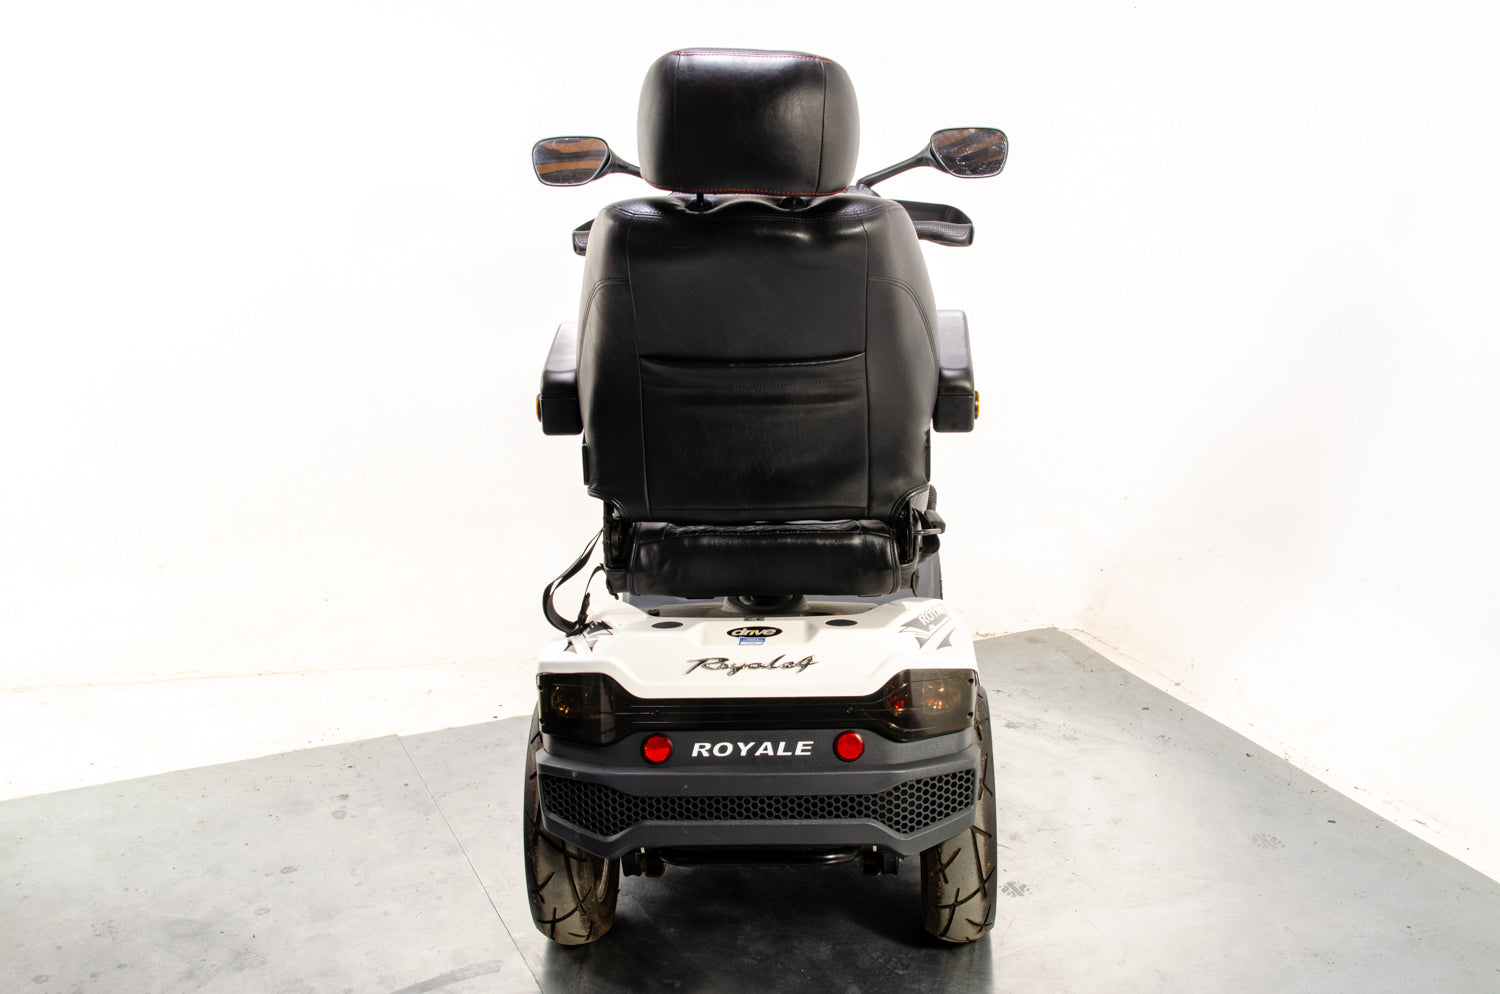 Drive Royale 4 Used Mobility Scooter 8mph Large Comfort Class 3 Road Legal Luxury 13497